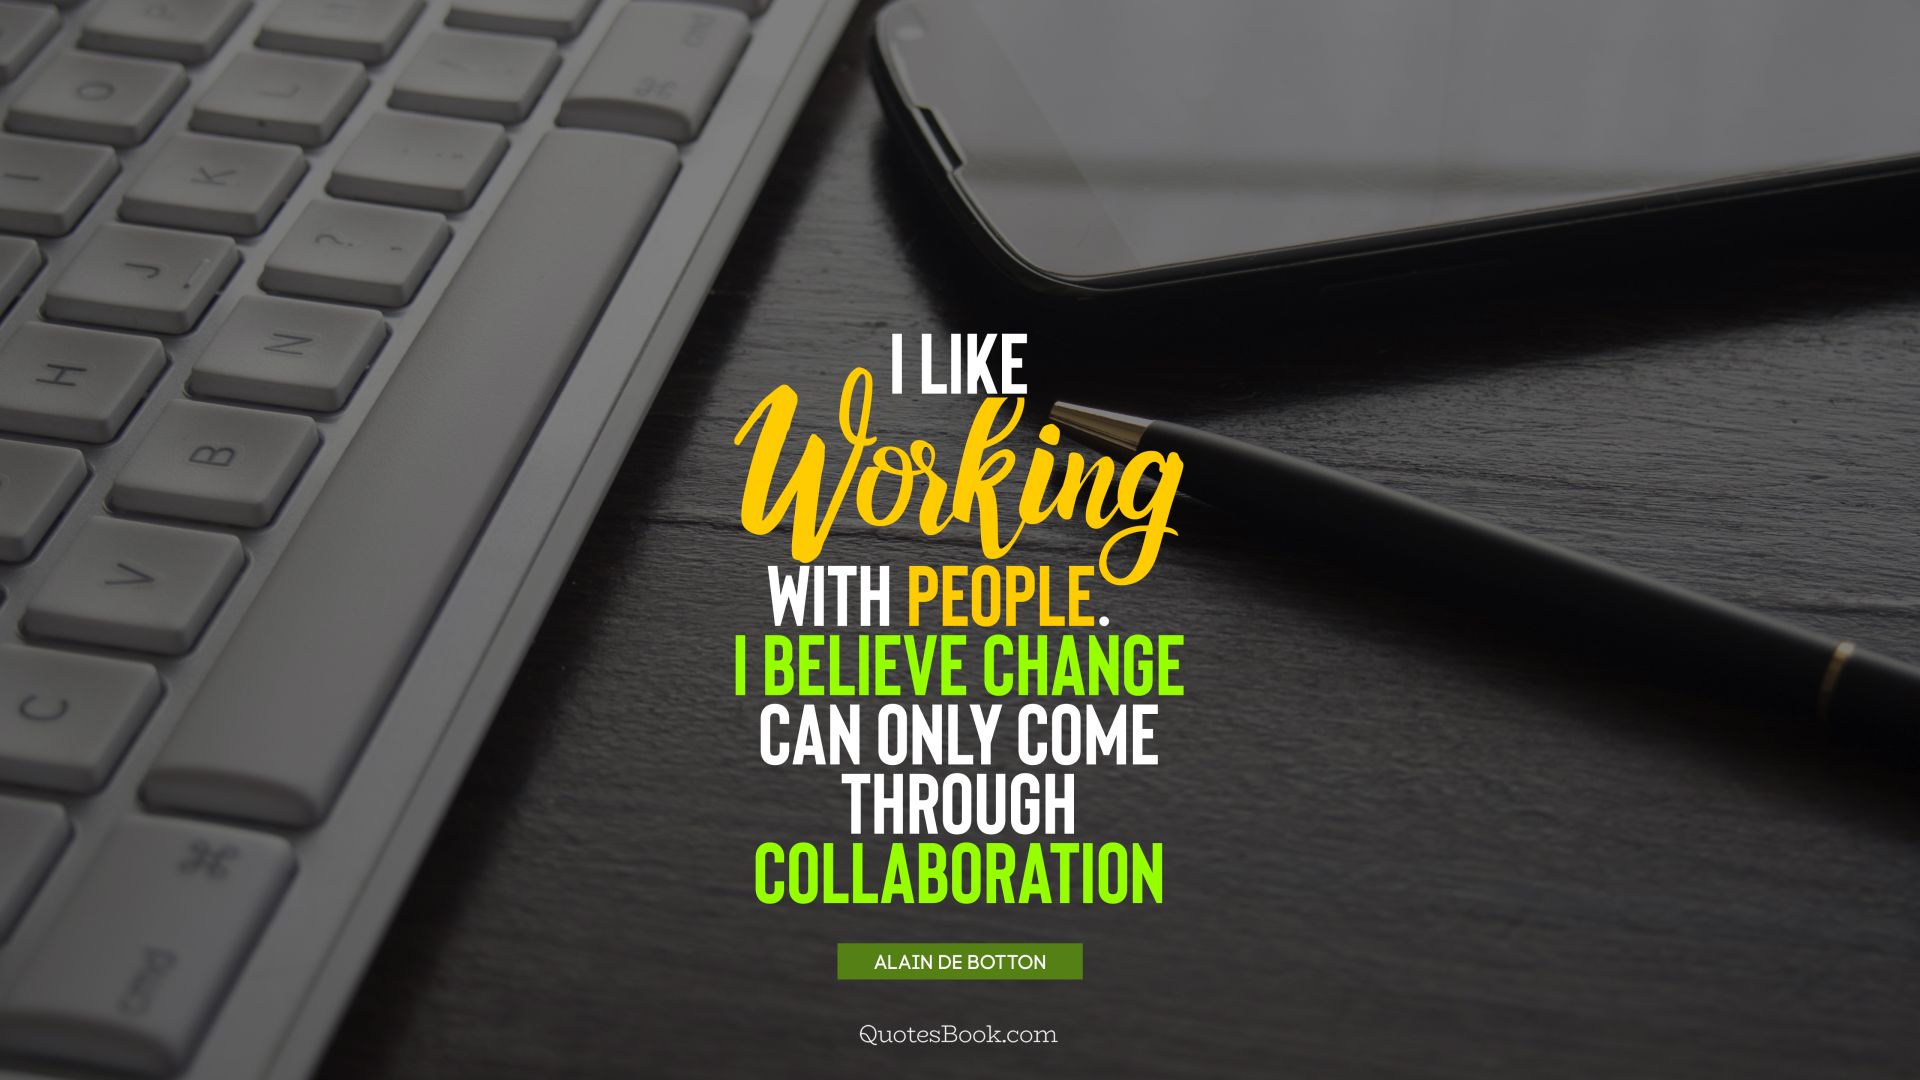 I like working with people. I believe change can only come through collaboration. - Quote by Alain de Botton